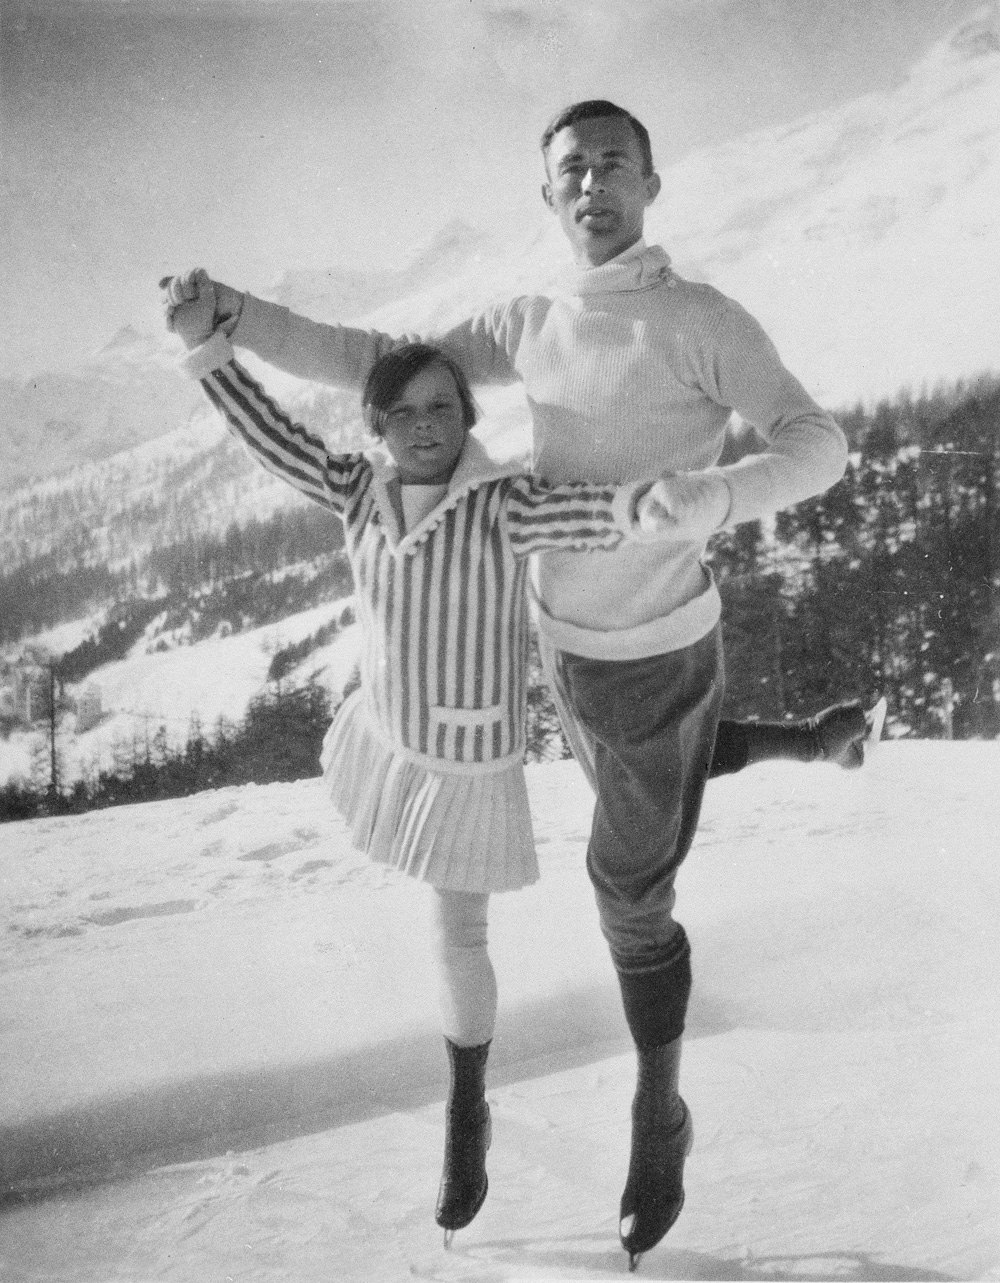 Figure skaters Sonja Henie, 11, of Norway and Gilles Grafstrom of Sweden pose at the Olympic Games in Chamonix, France, in 1924.